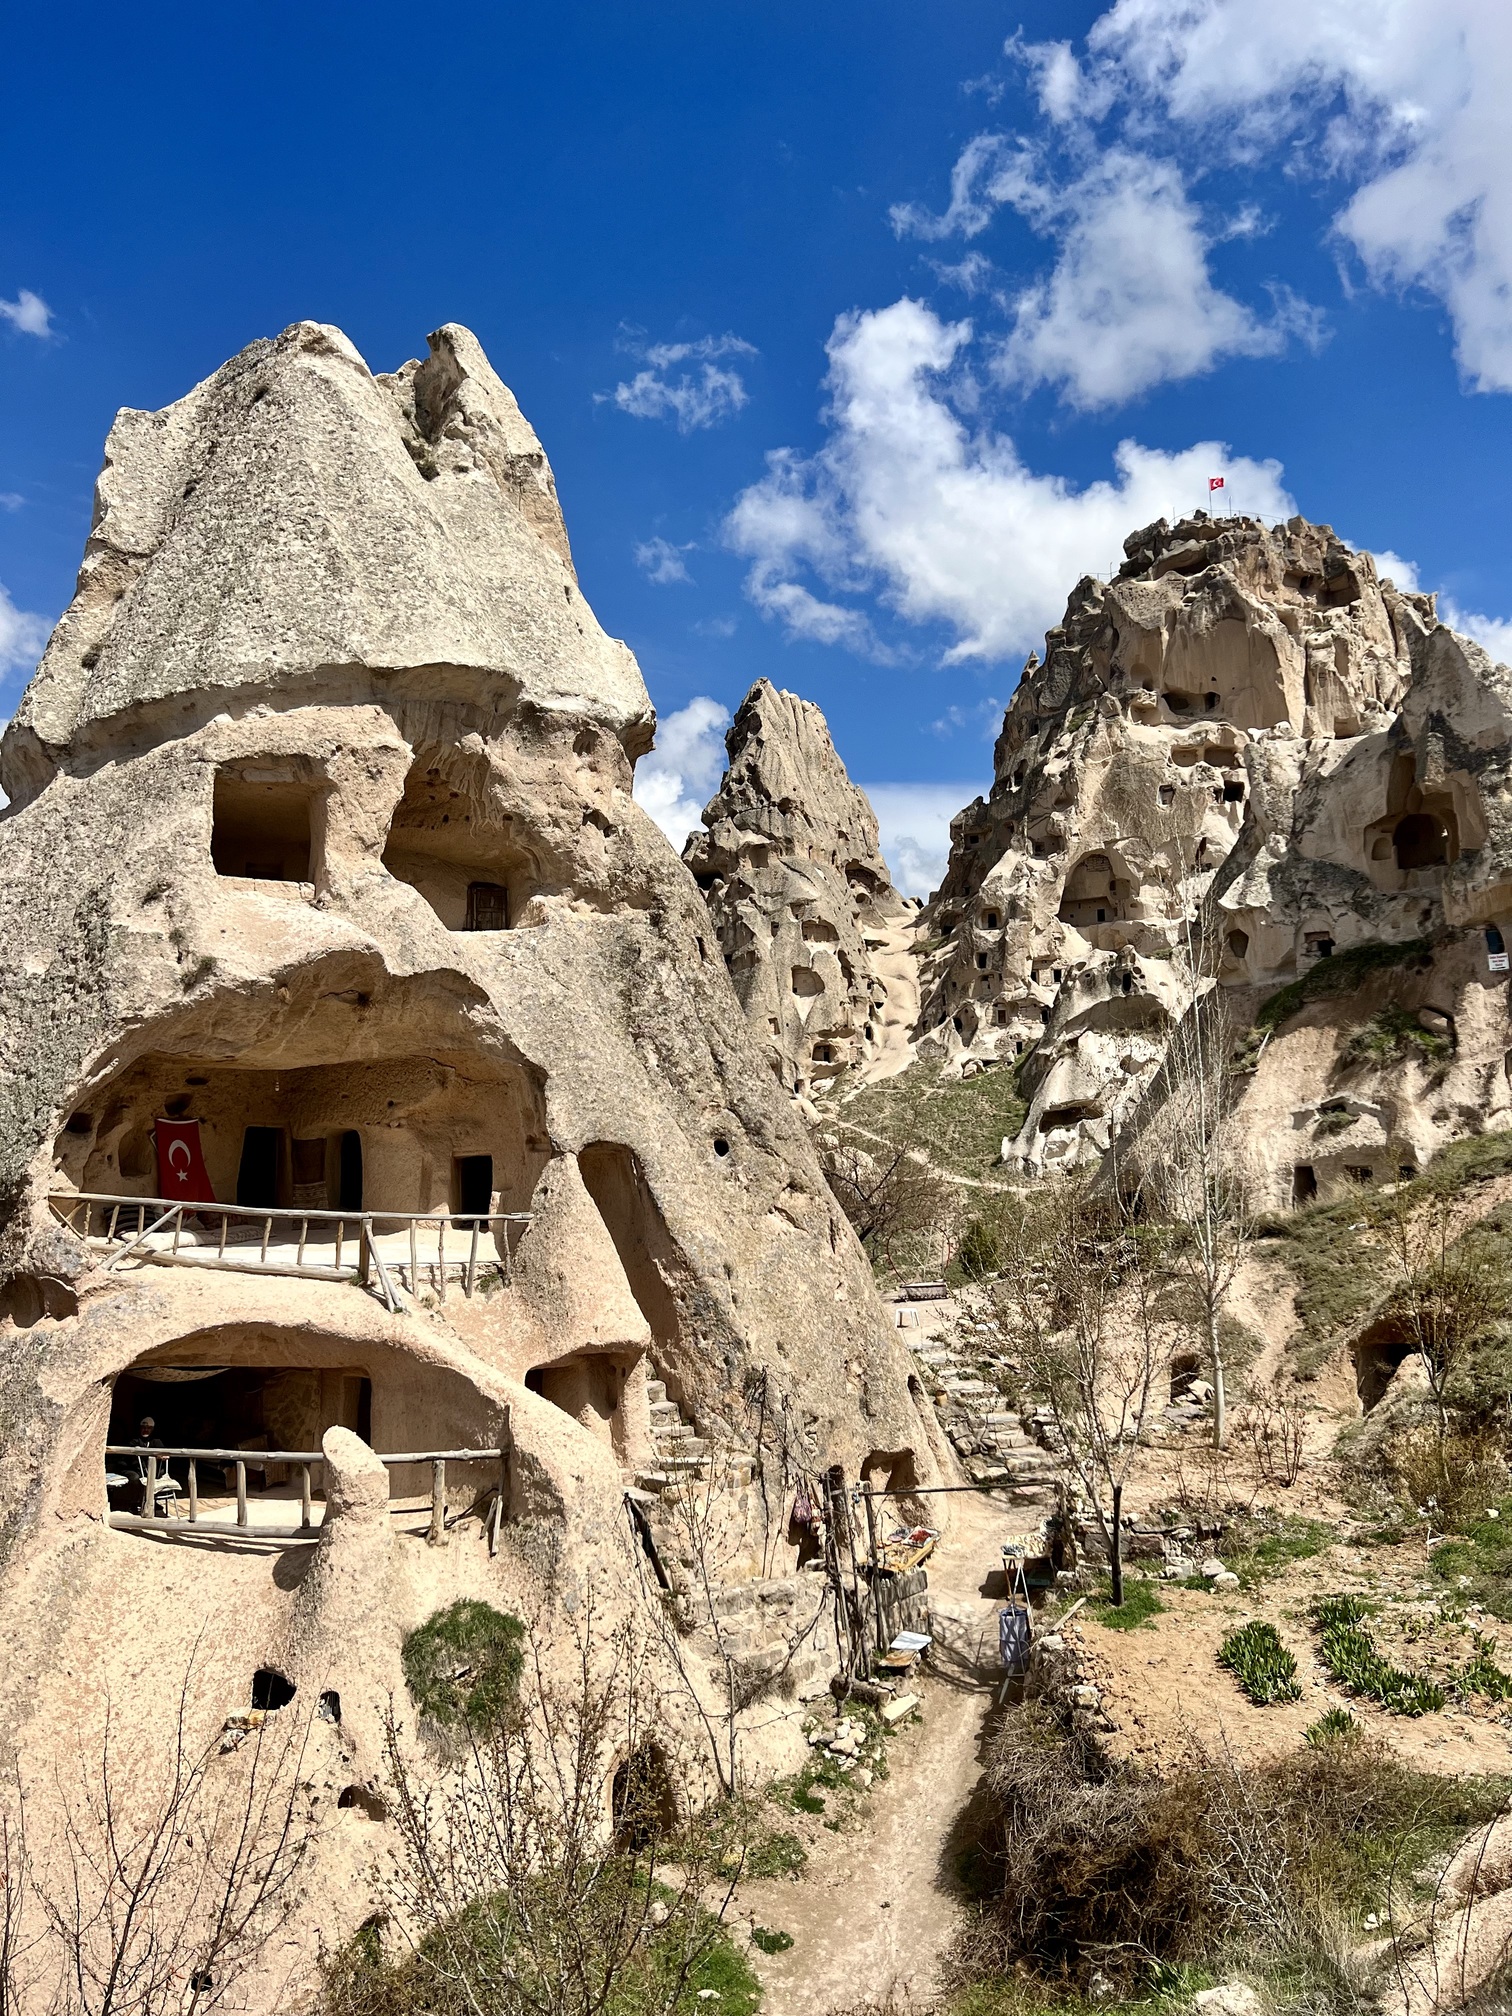 Explore the diverse landscapes and cultural heritage of Turkey in this captivating image showcasing iconic landmarks and natural beauty; travel guide to Cappadocia